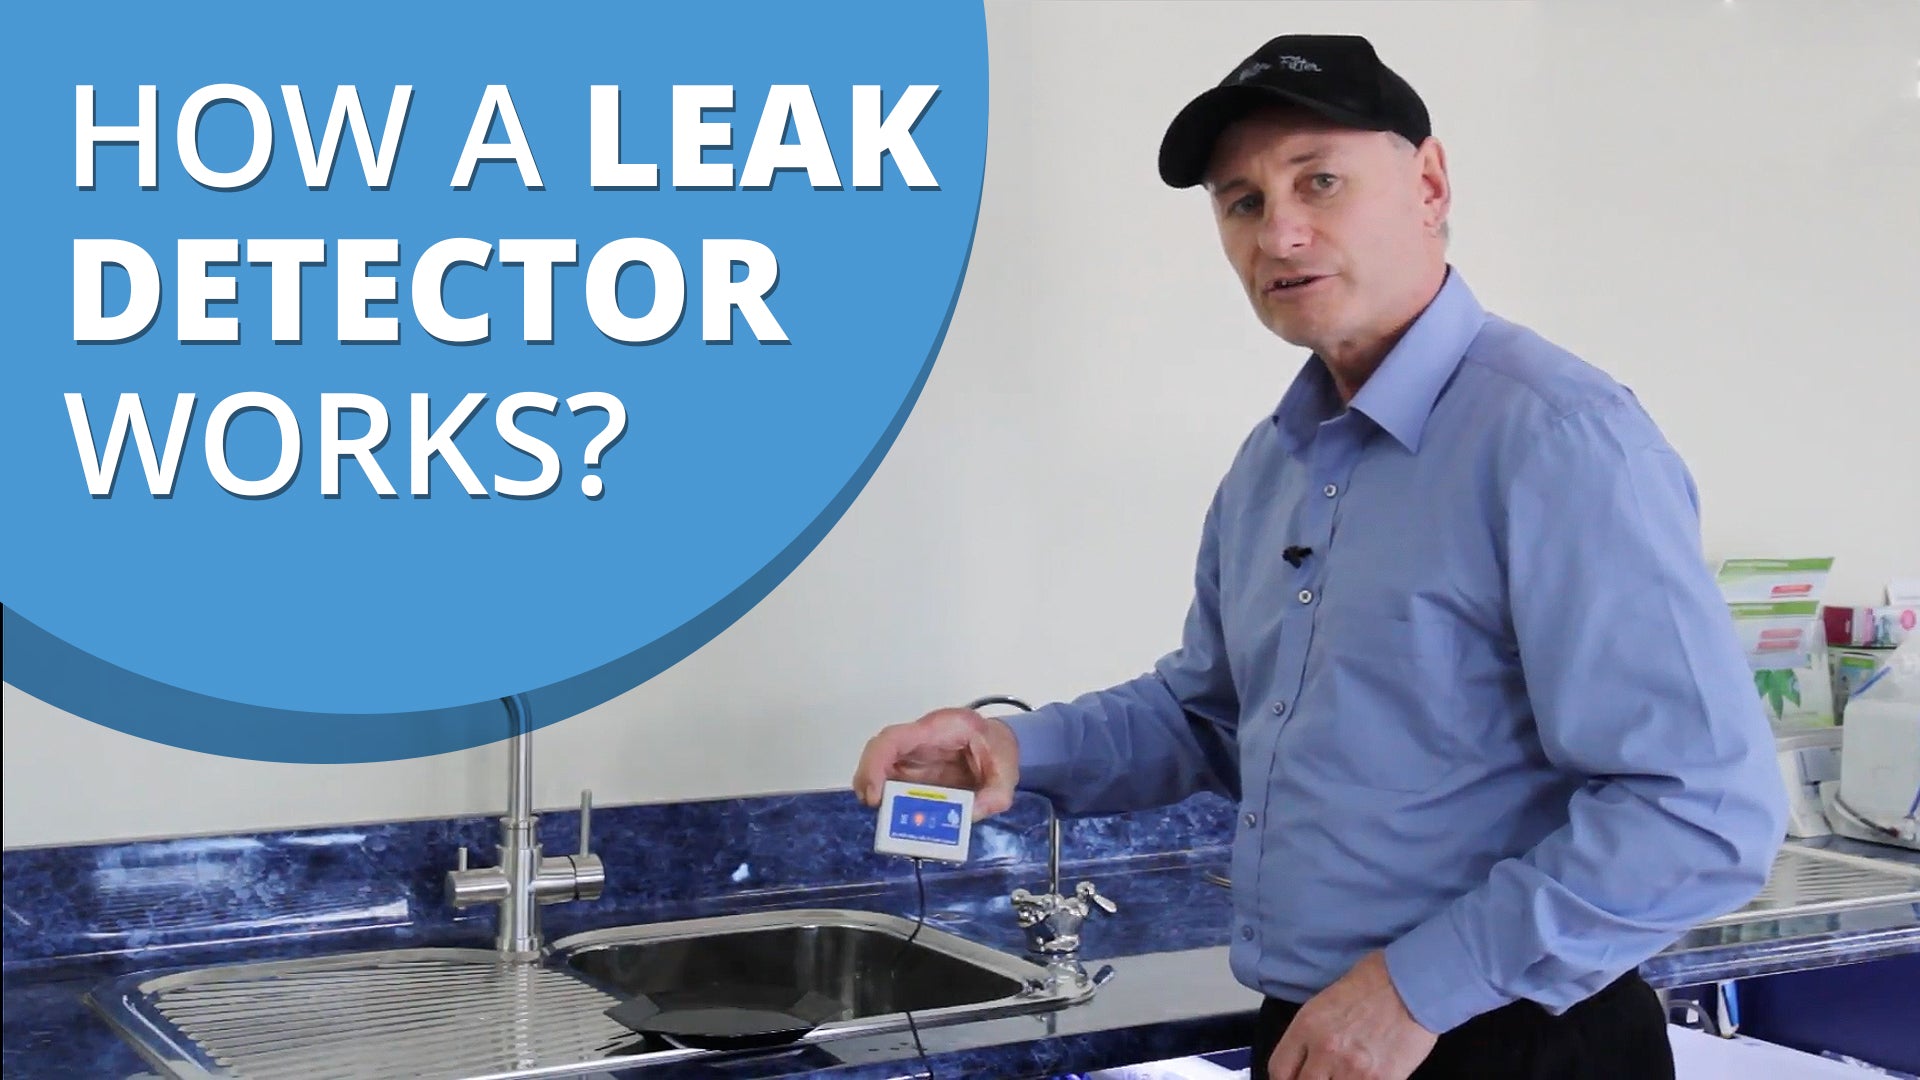 [VIDEO] Leak Detector Demonstration - How a Leak Detector Works and Why Every Home Should Have One